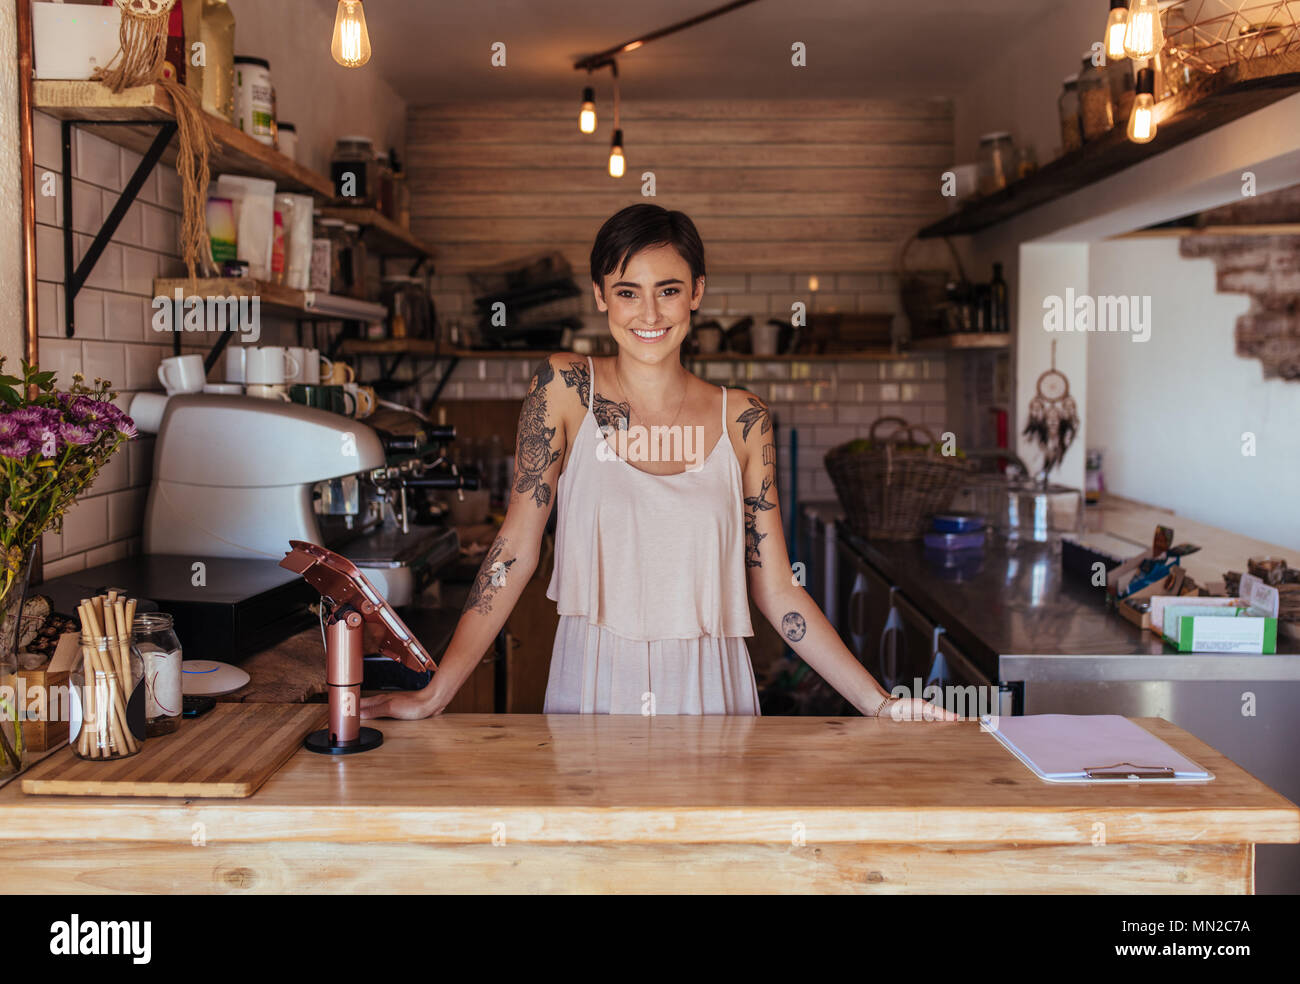 Woman standing at the billing counter of her cafe posing. Smiling restaurant owner standing beside the billing machine. Stock Photo